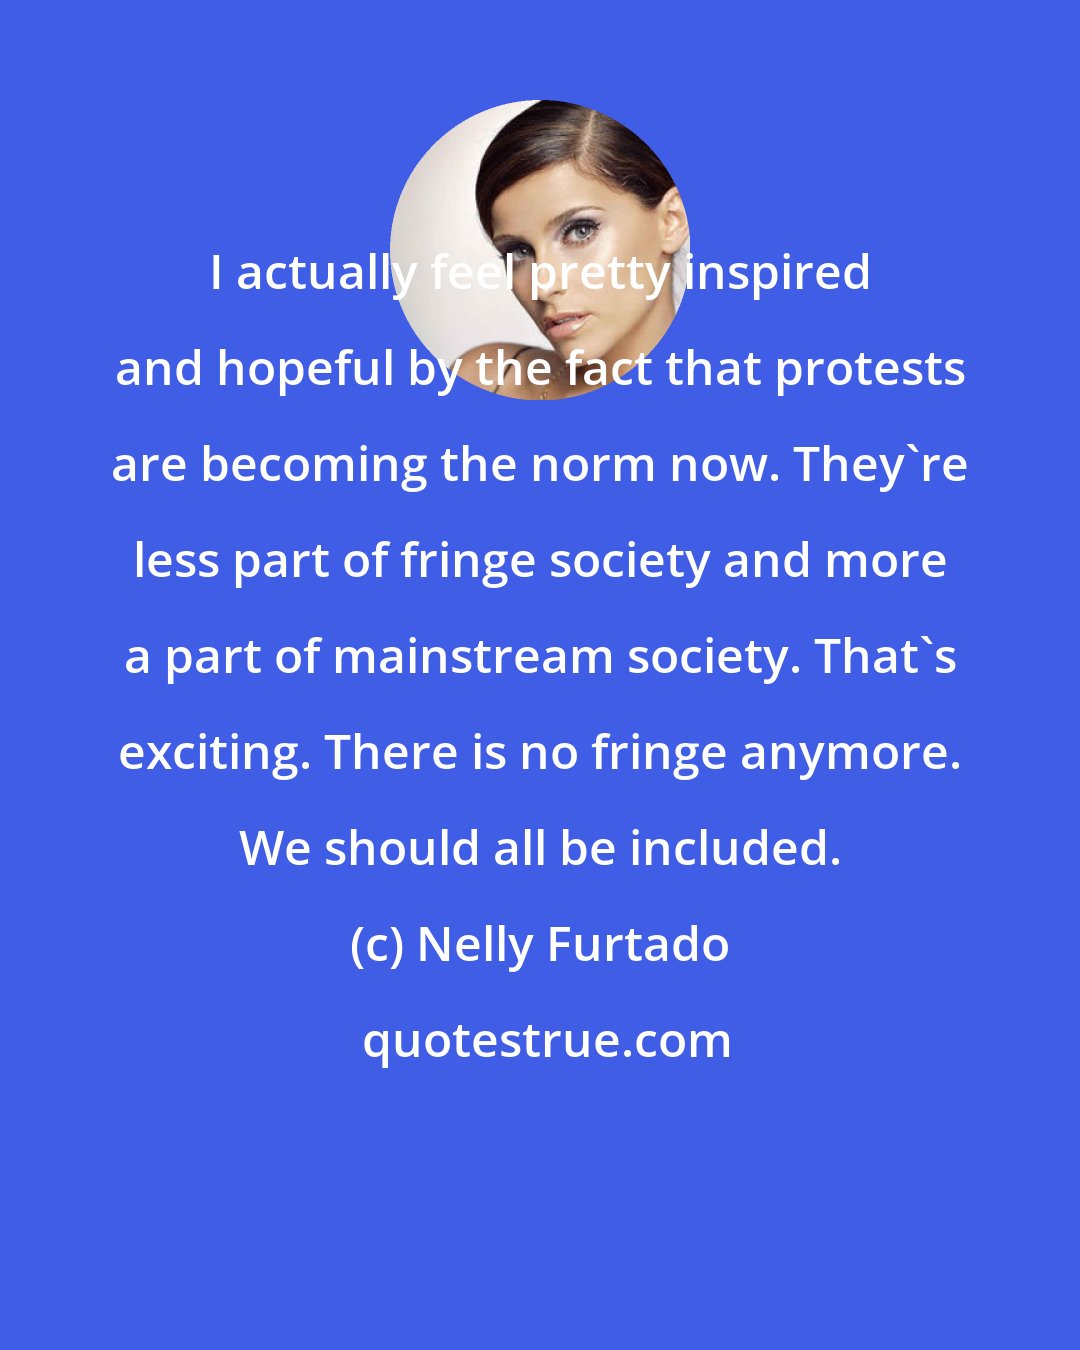 Nelly Furtado: I actually feel pretty inspired and hopeful by the fact that protests are becoming the norm now. They're less part of fringe society and more a part of mainstream society. That's exciting. There is no fringe anymore. We should all be included.